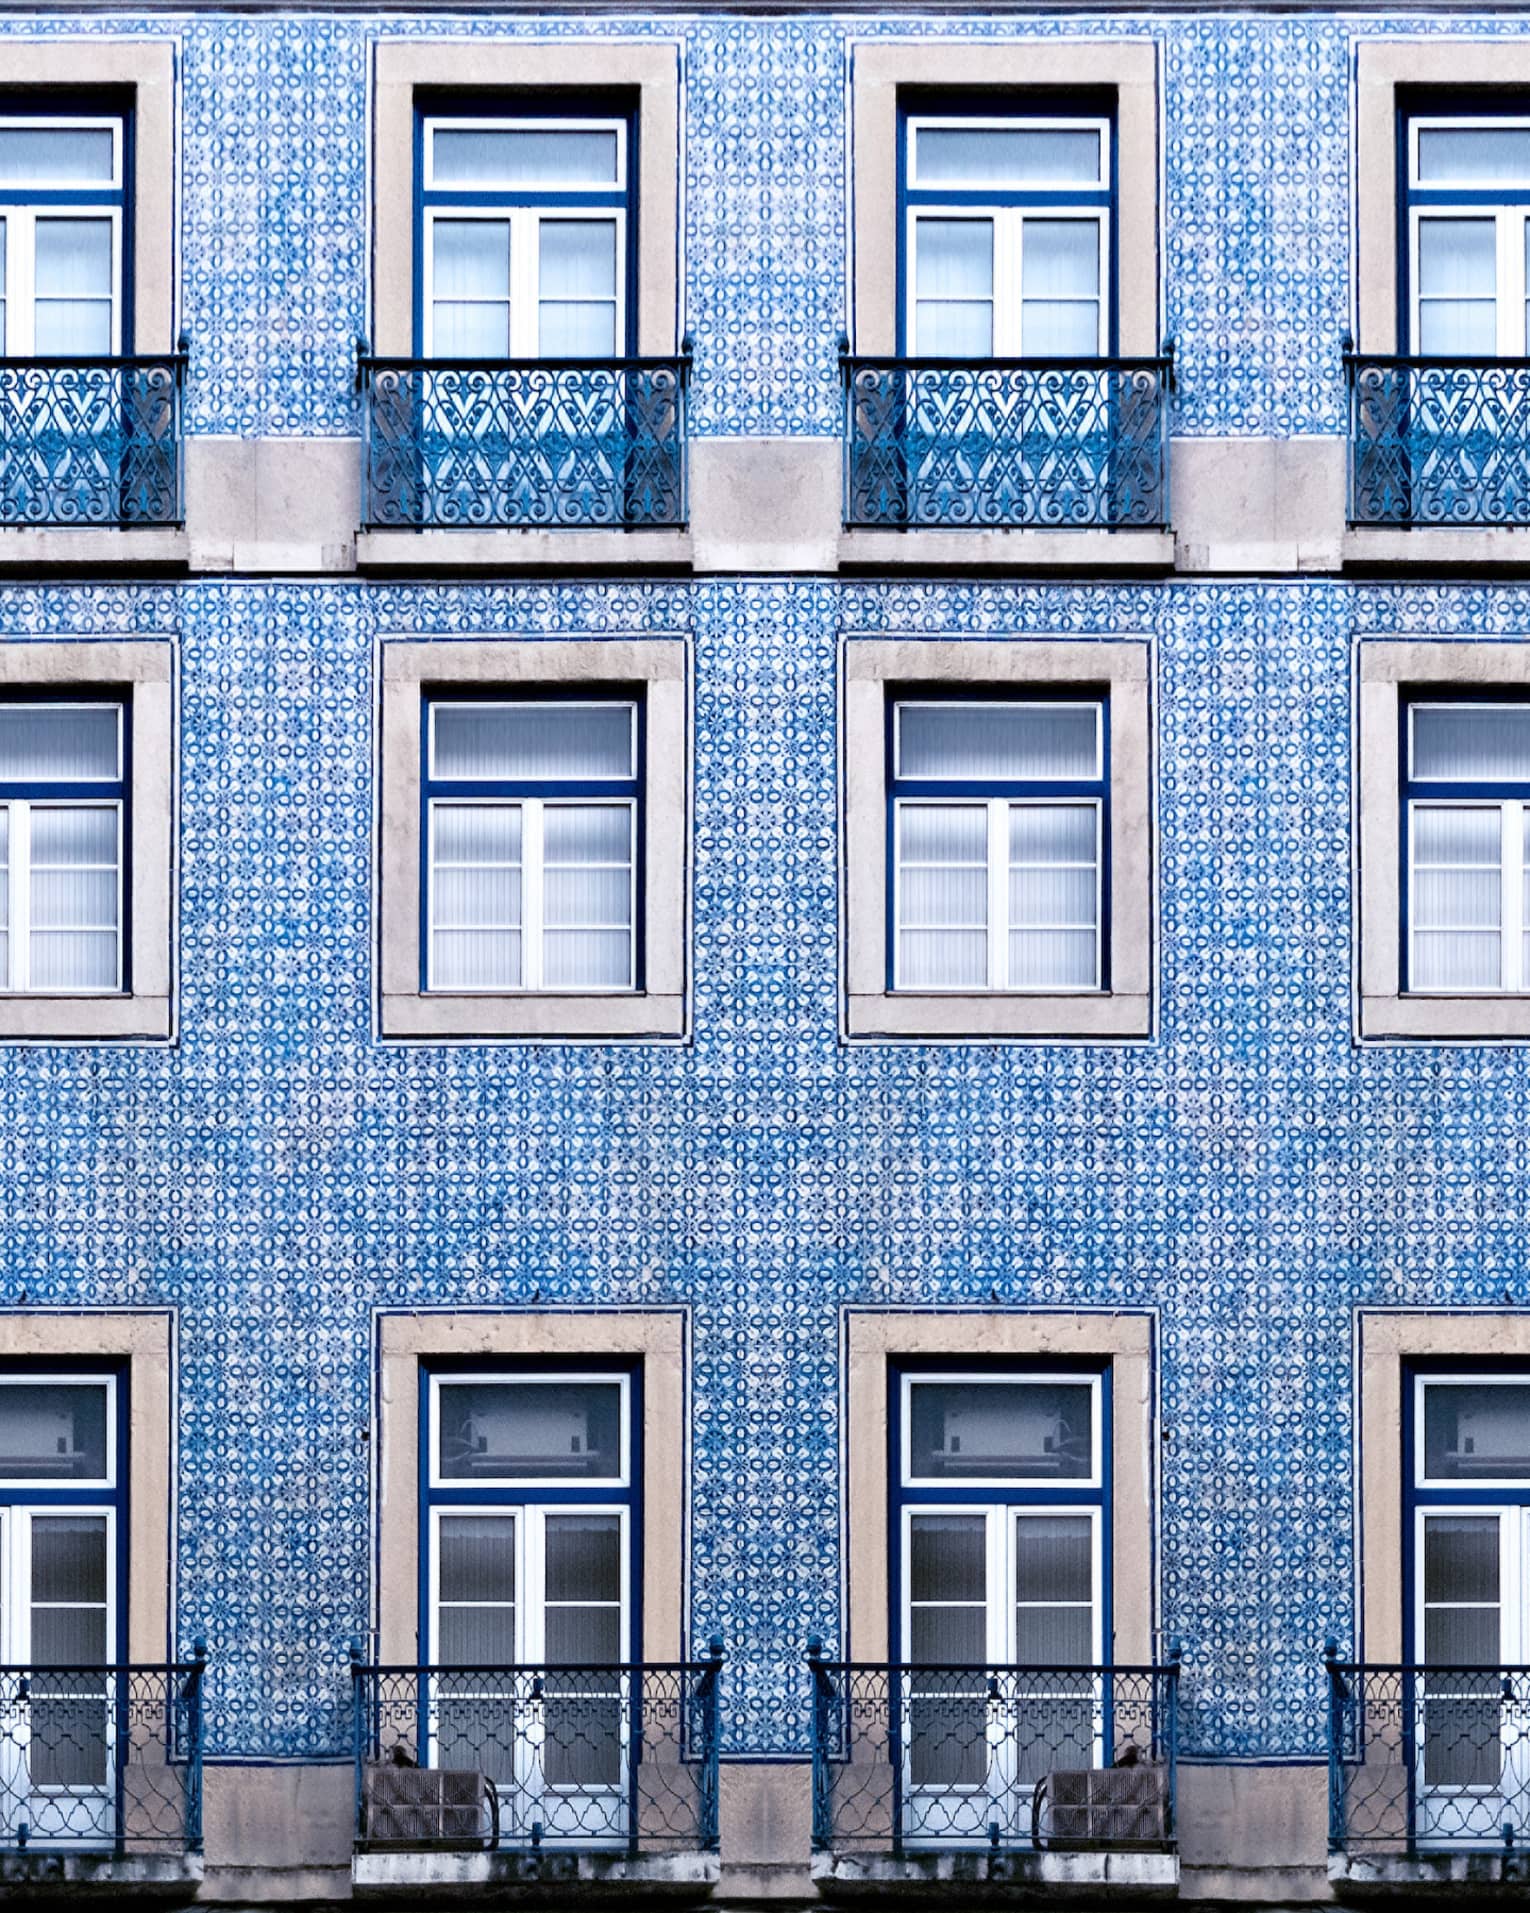 A blue tiled wall with many windows and balconies.